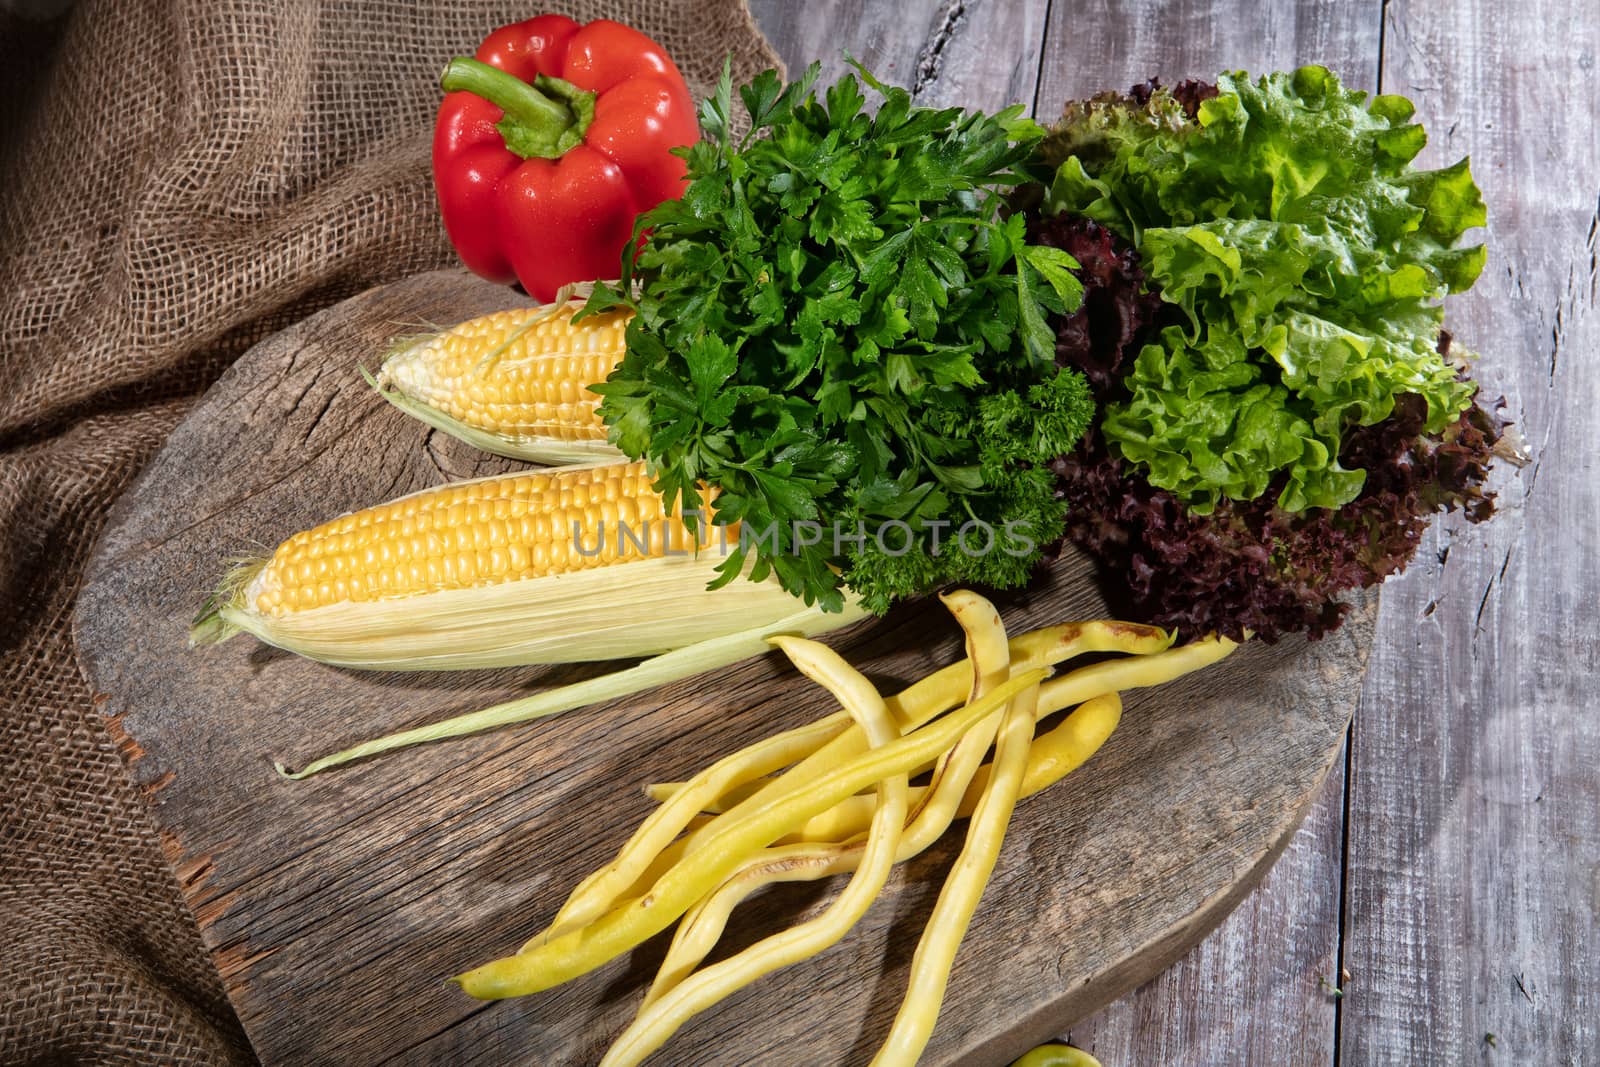 Maize, greenery, pea and tomato on a wooden table